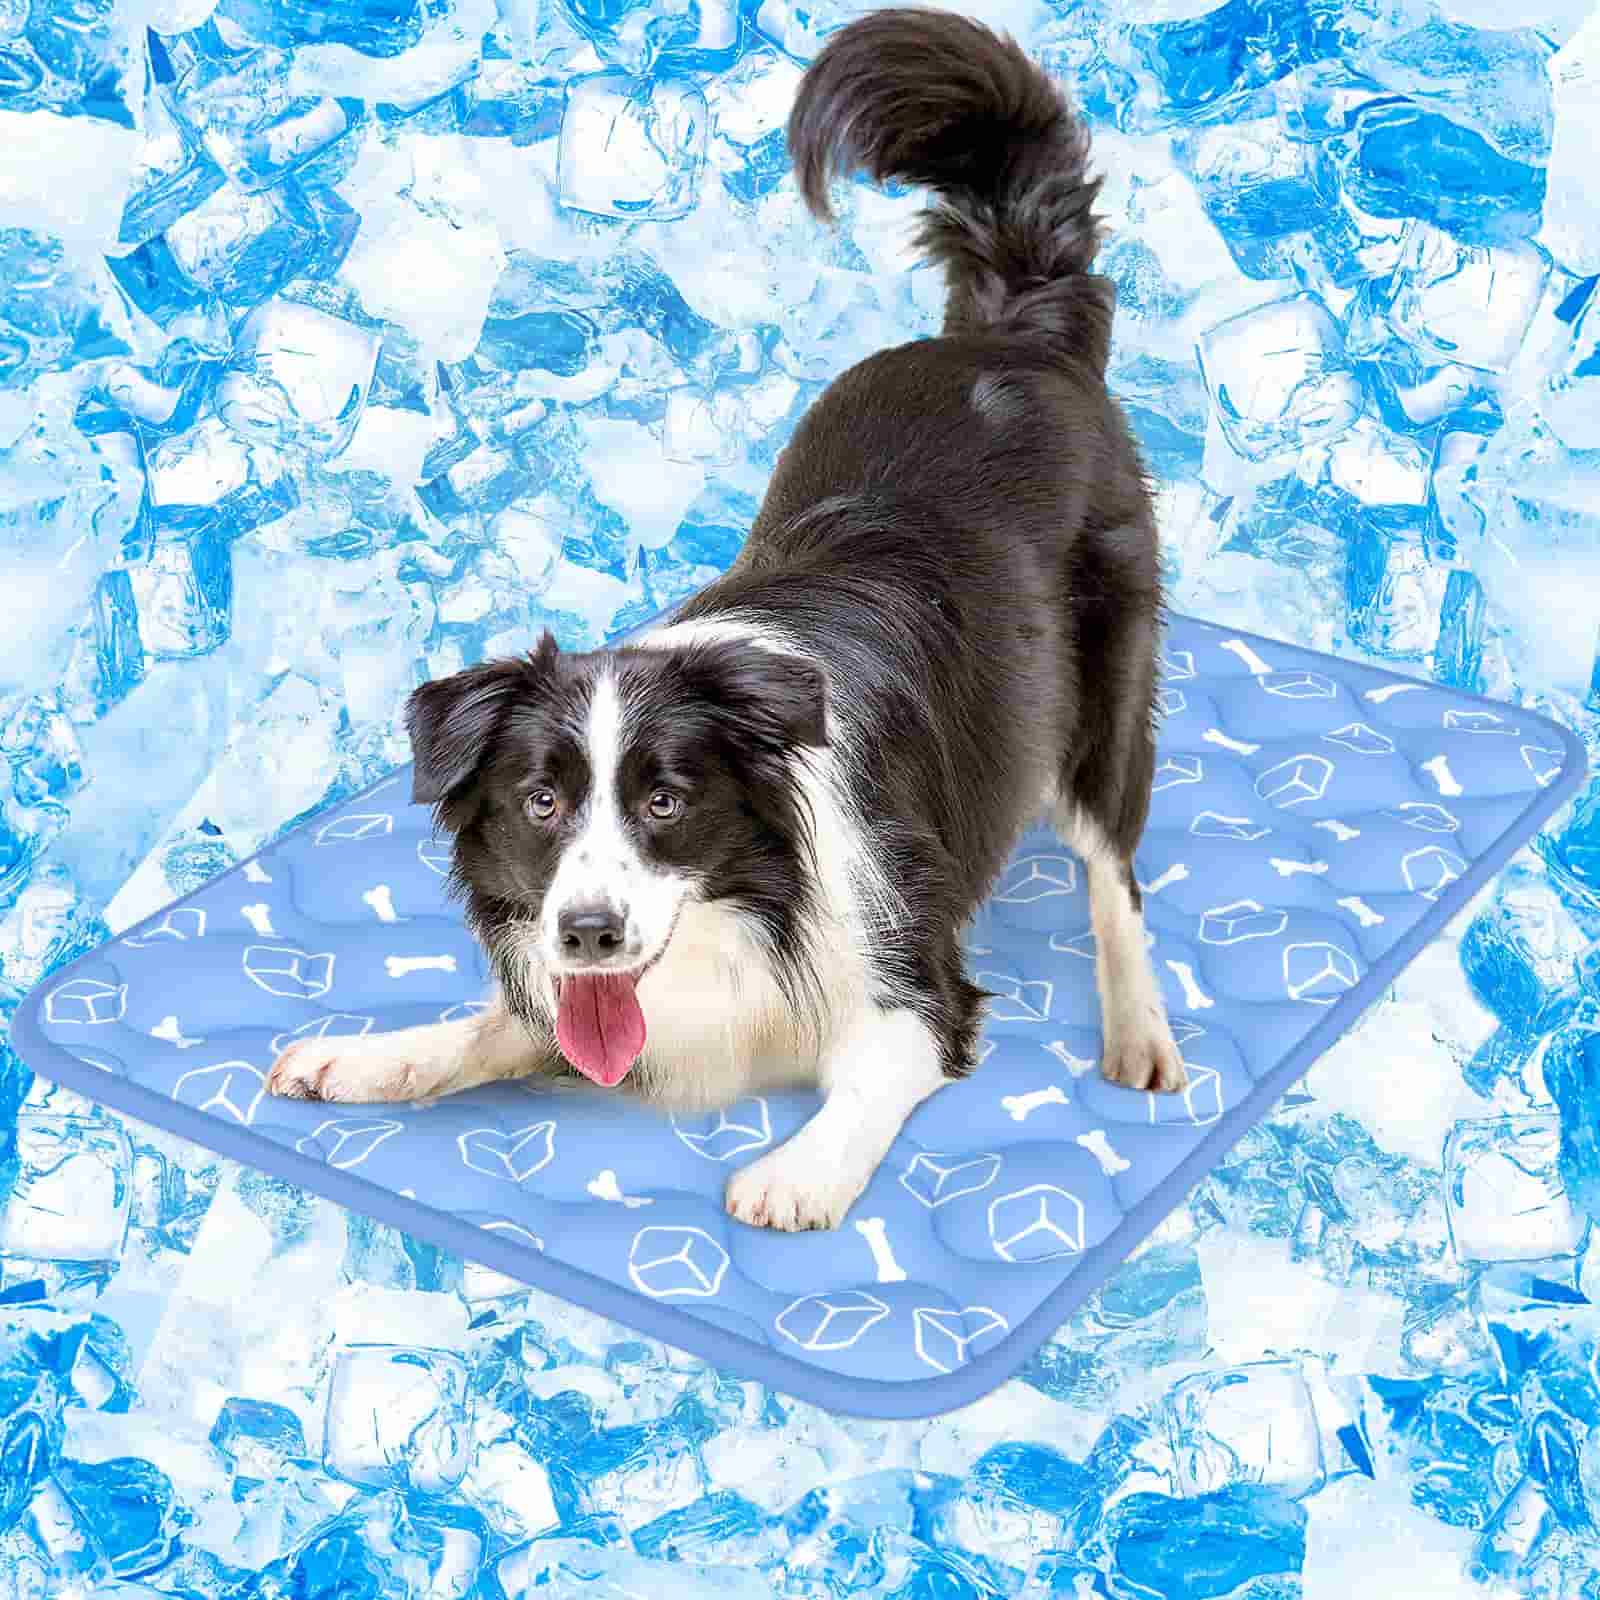 Thicken Cooling Mat for Large Dog